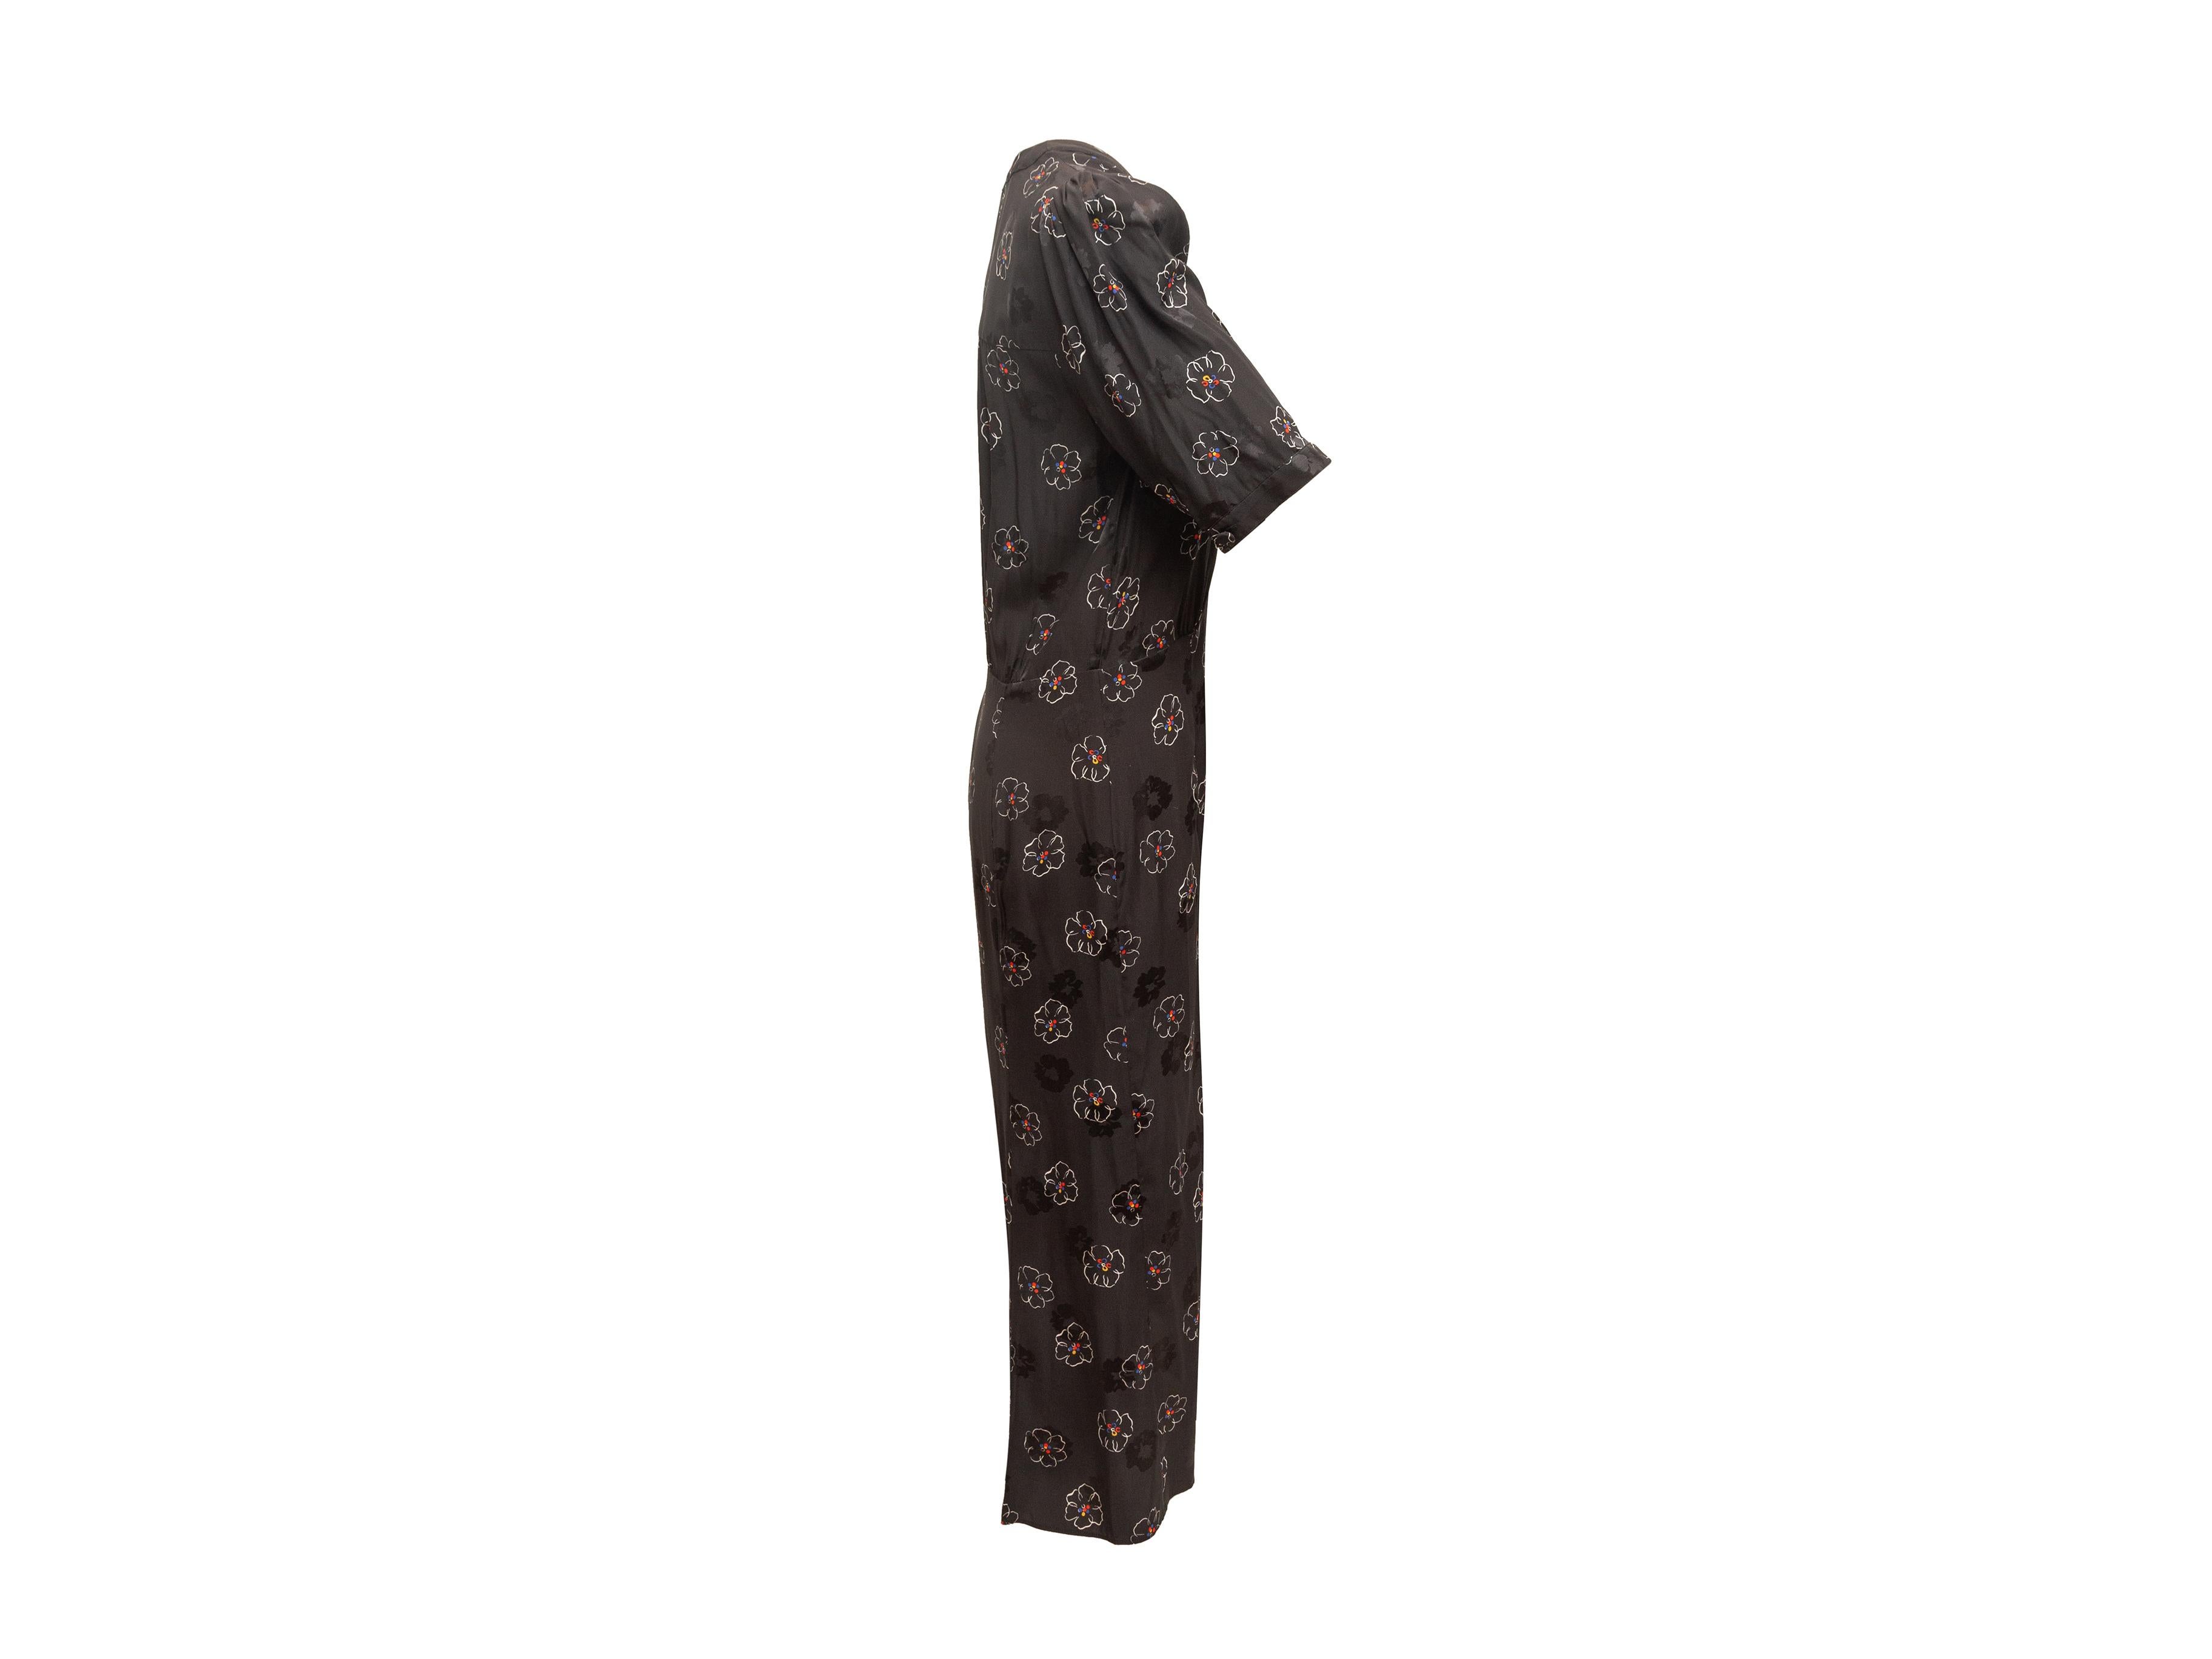 Product details: Black and multicolor silk floral print maxi dress by Veronica Beard. Surplice neckline. Short sleeves. Button closures at front. 40